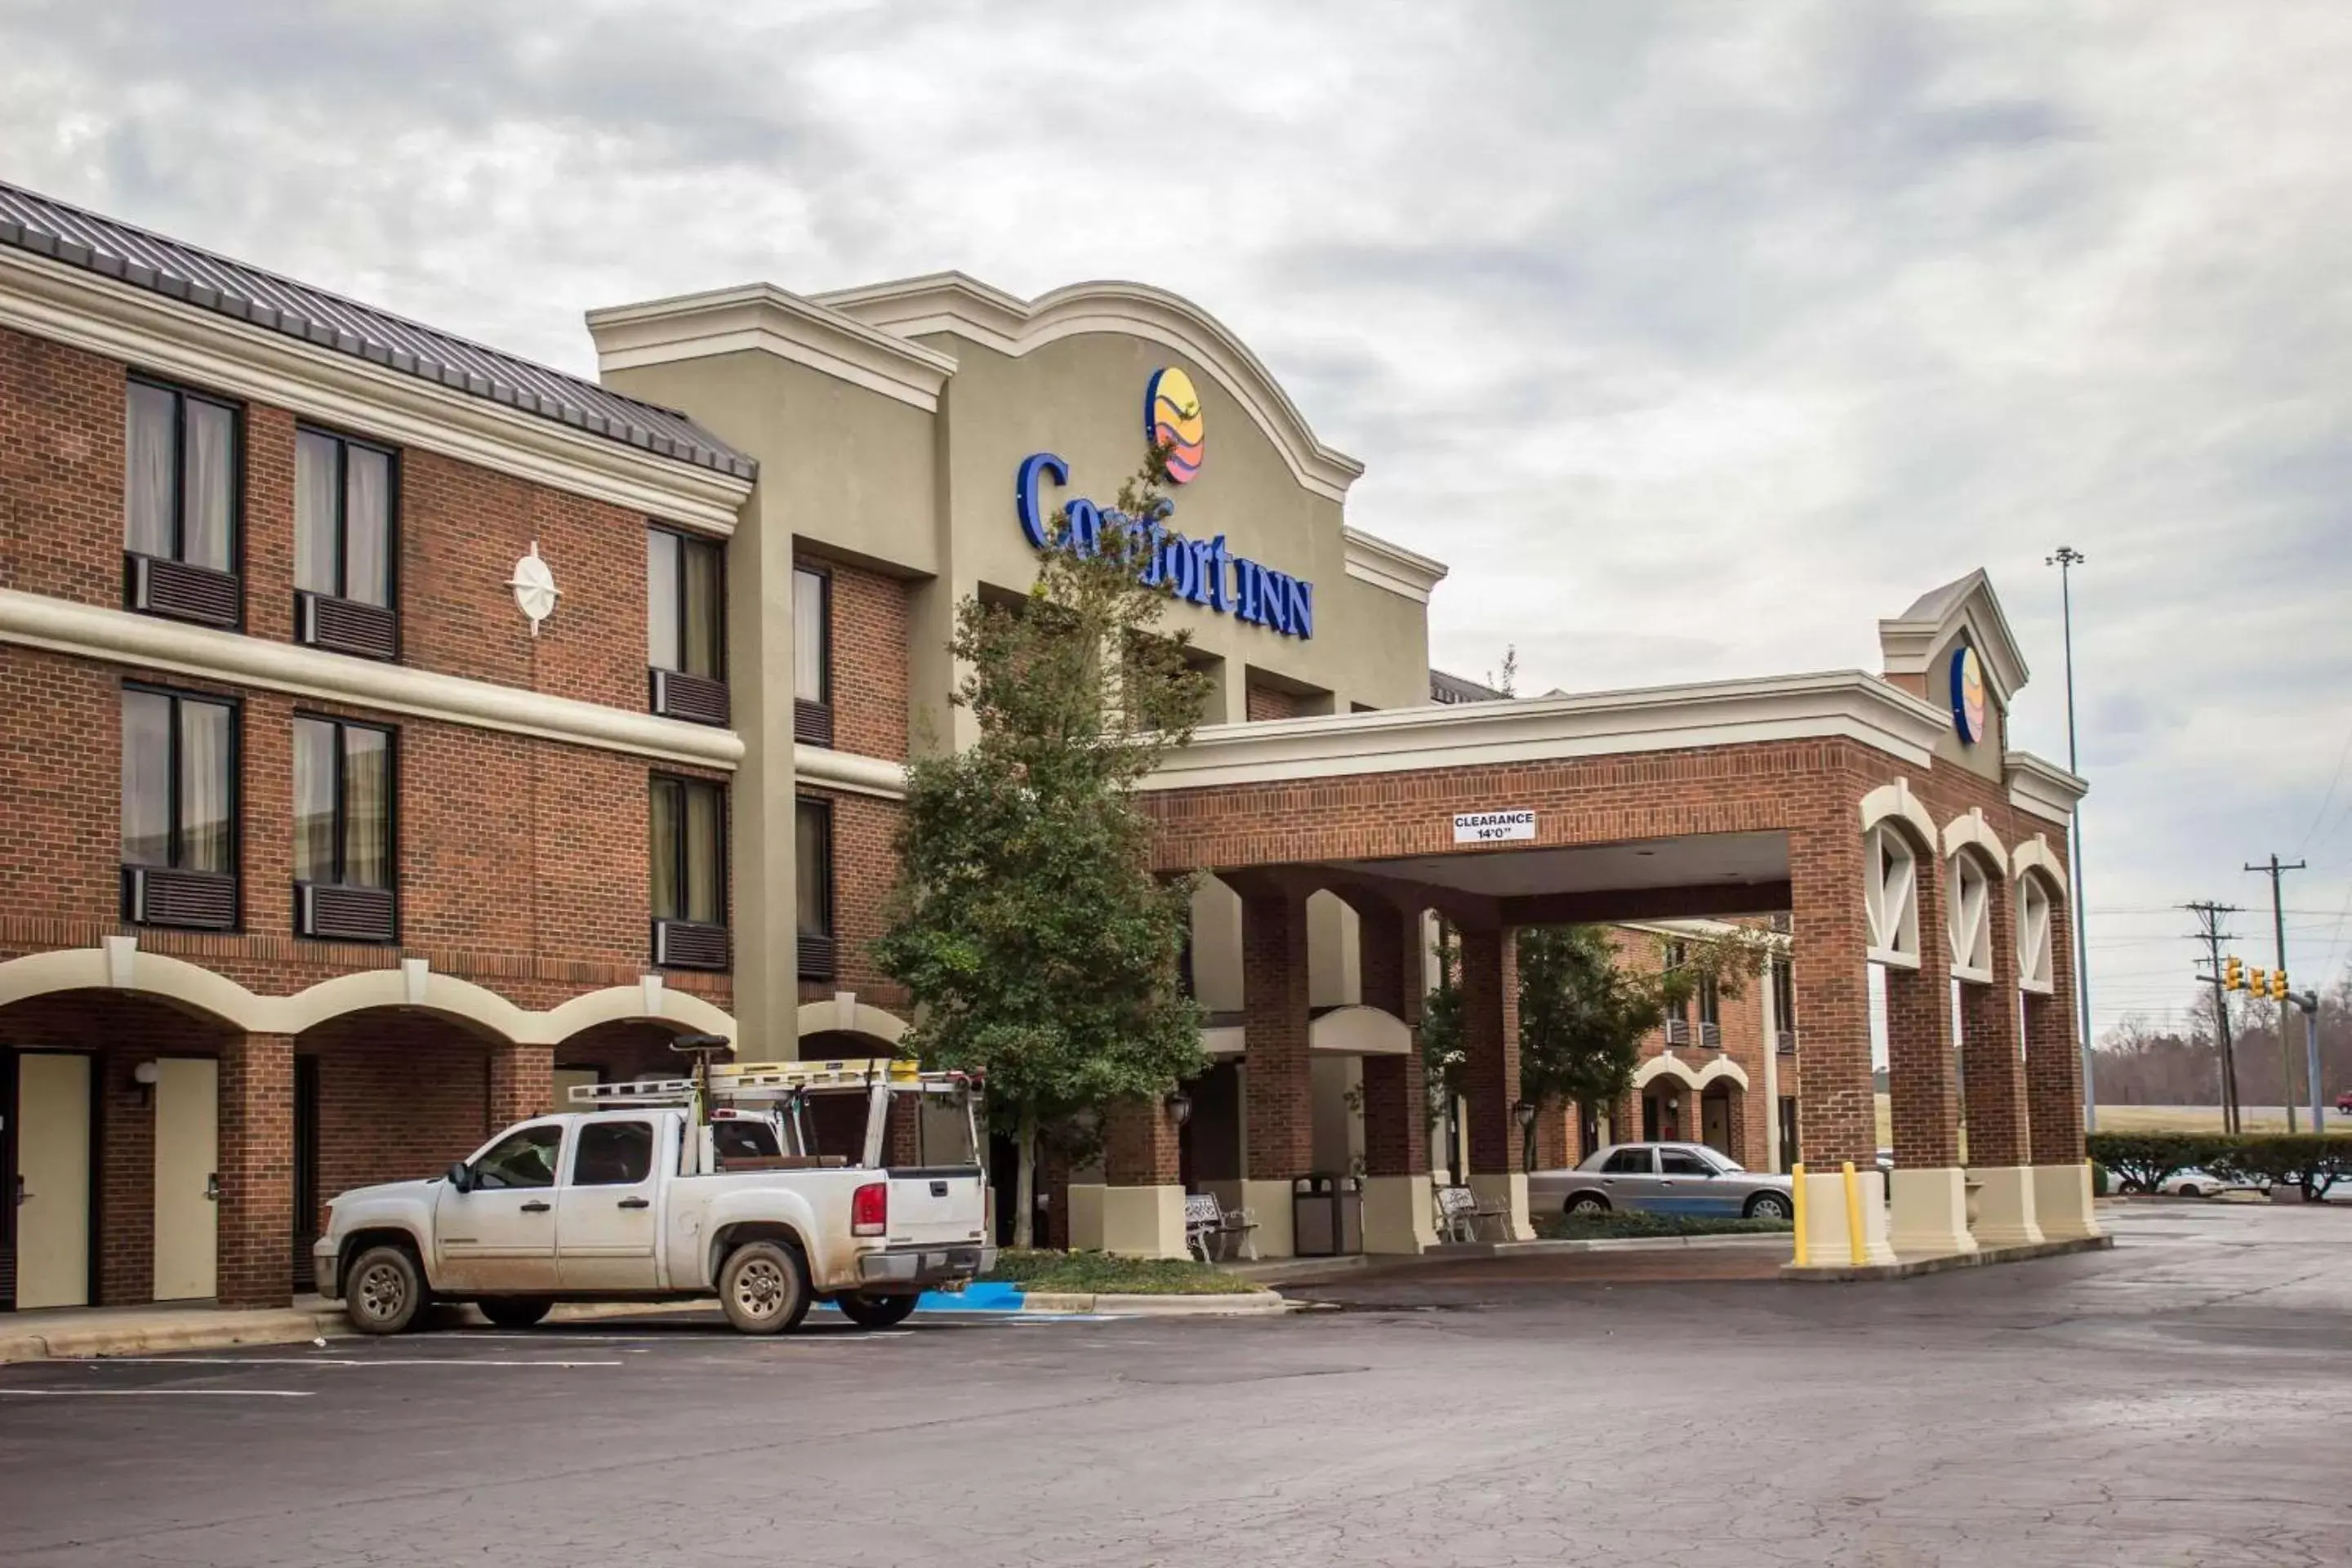 Property building in Comfort Inn Research Triangle Park